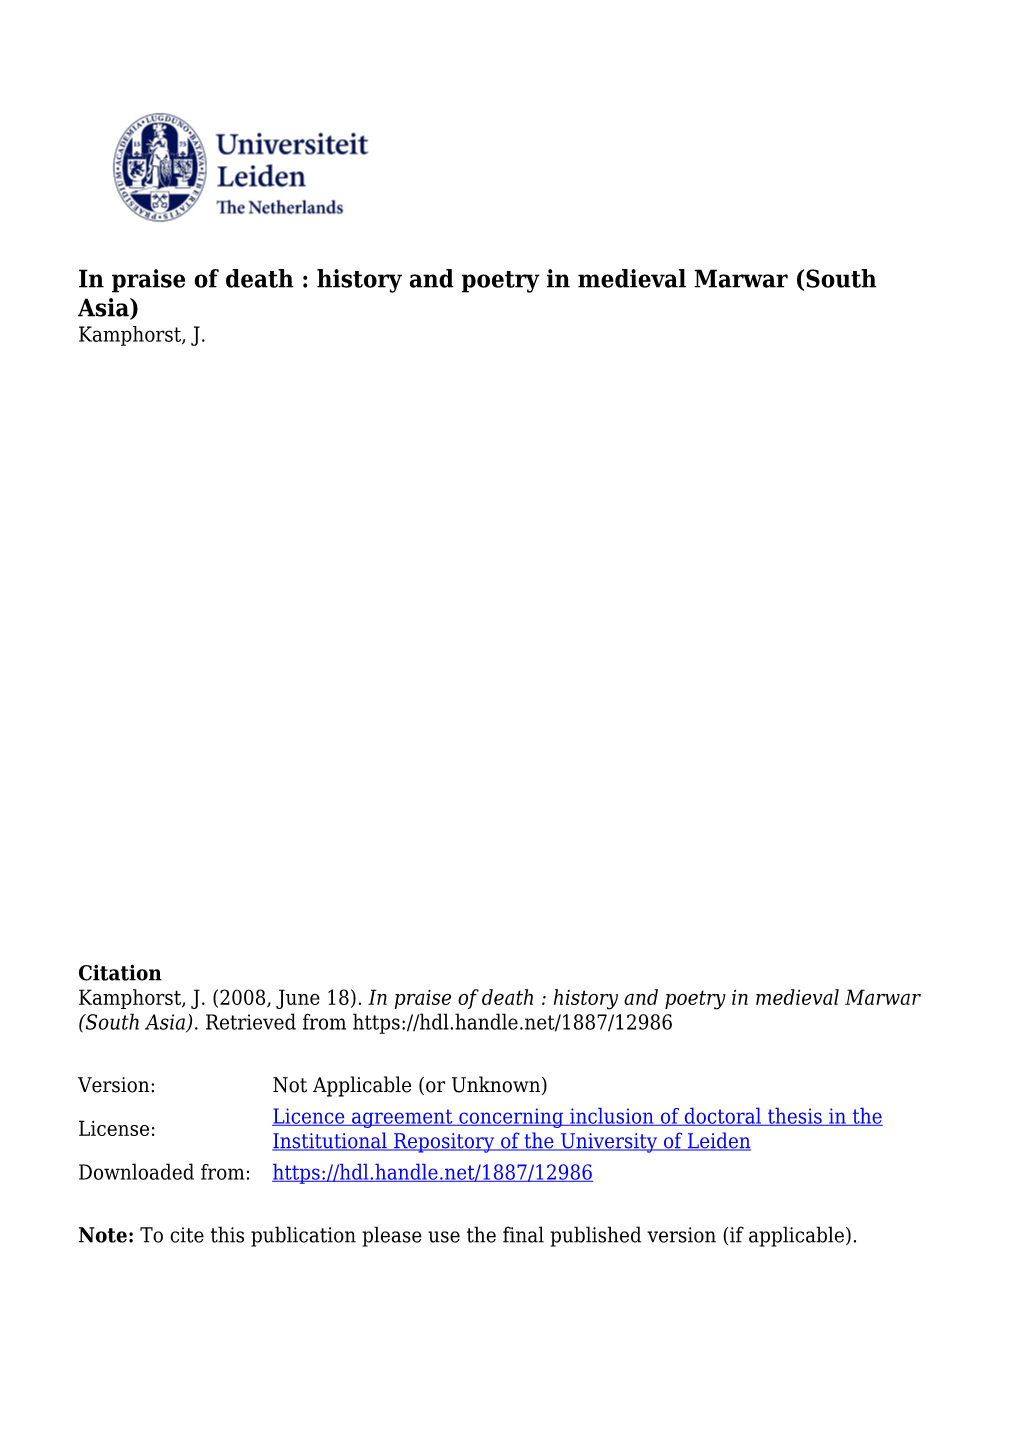 In Praise of Death: History and Poetry in Medieval Marwar (South Asia)